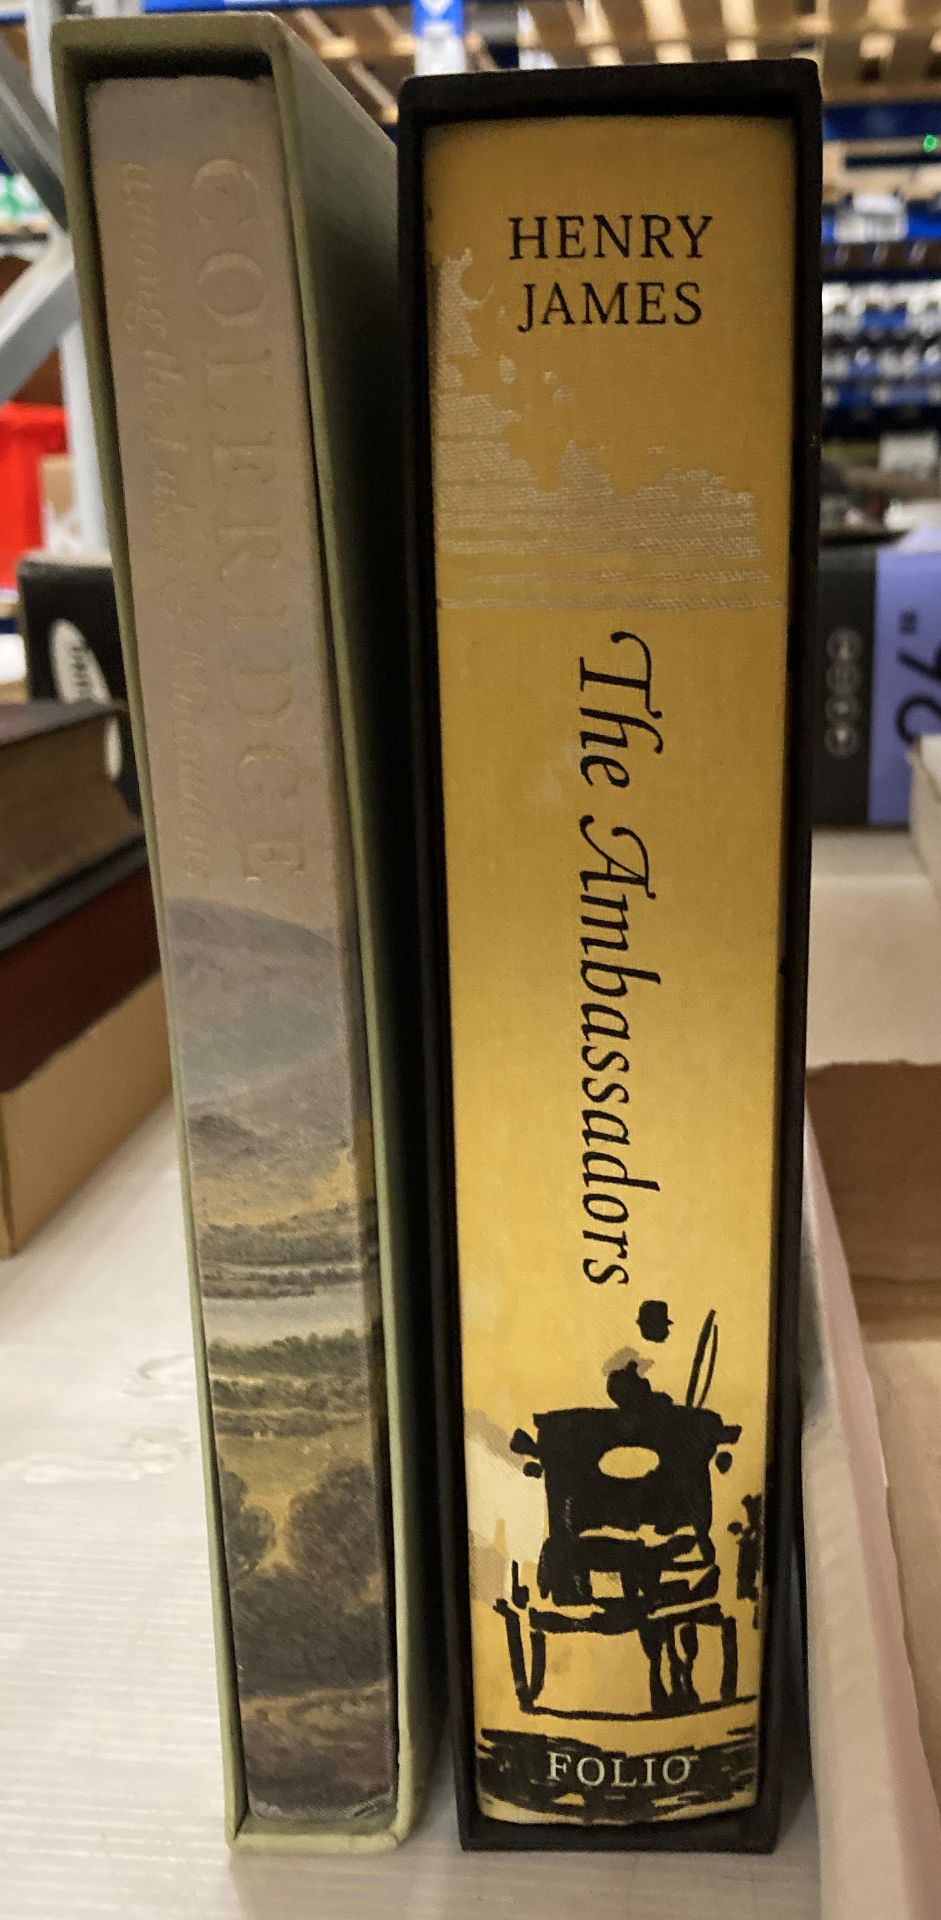 Folio Society - Two books in cases - Henry James 'The Ambassadors' and Coleridge 'Among the Lakes &